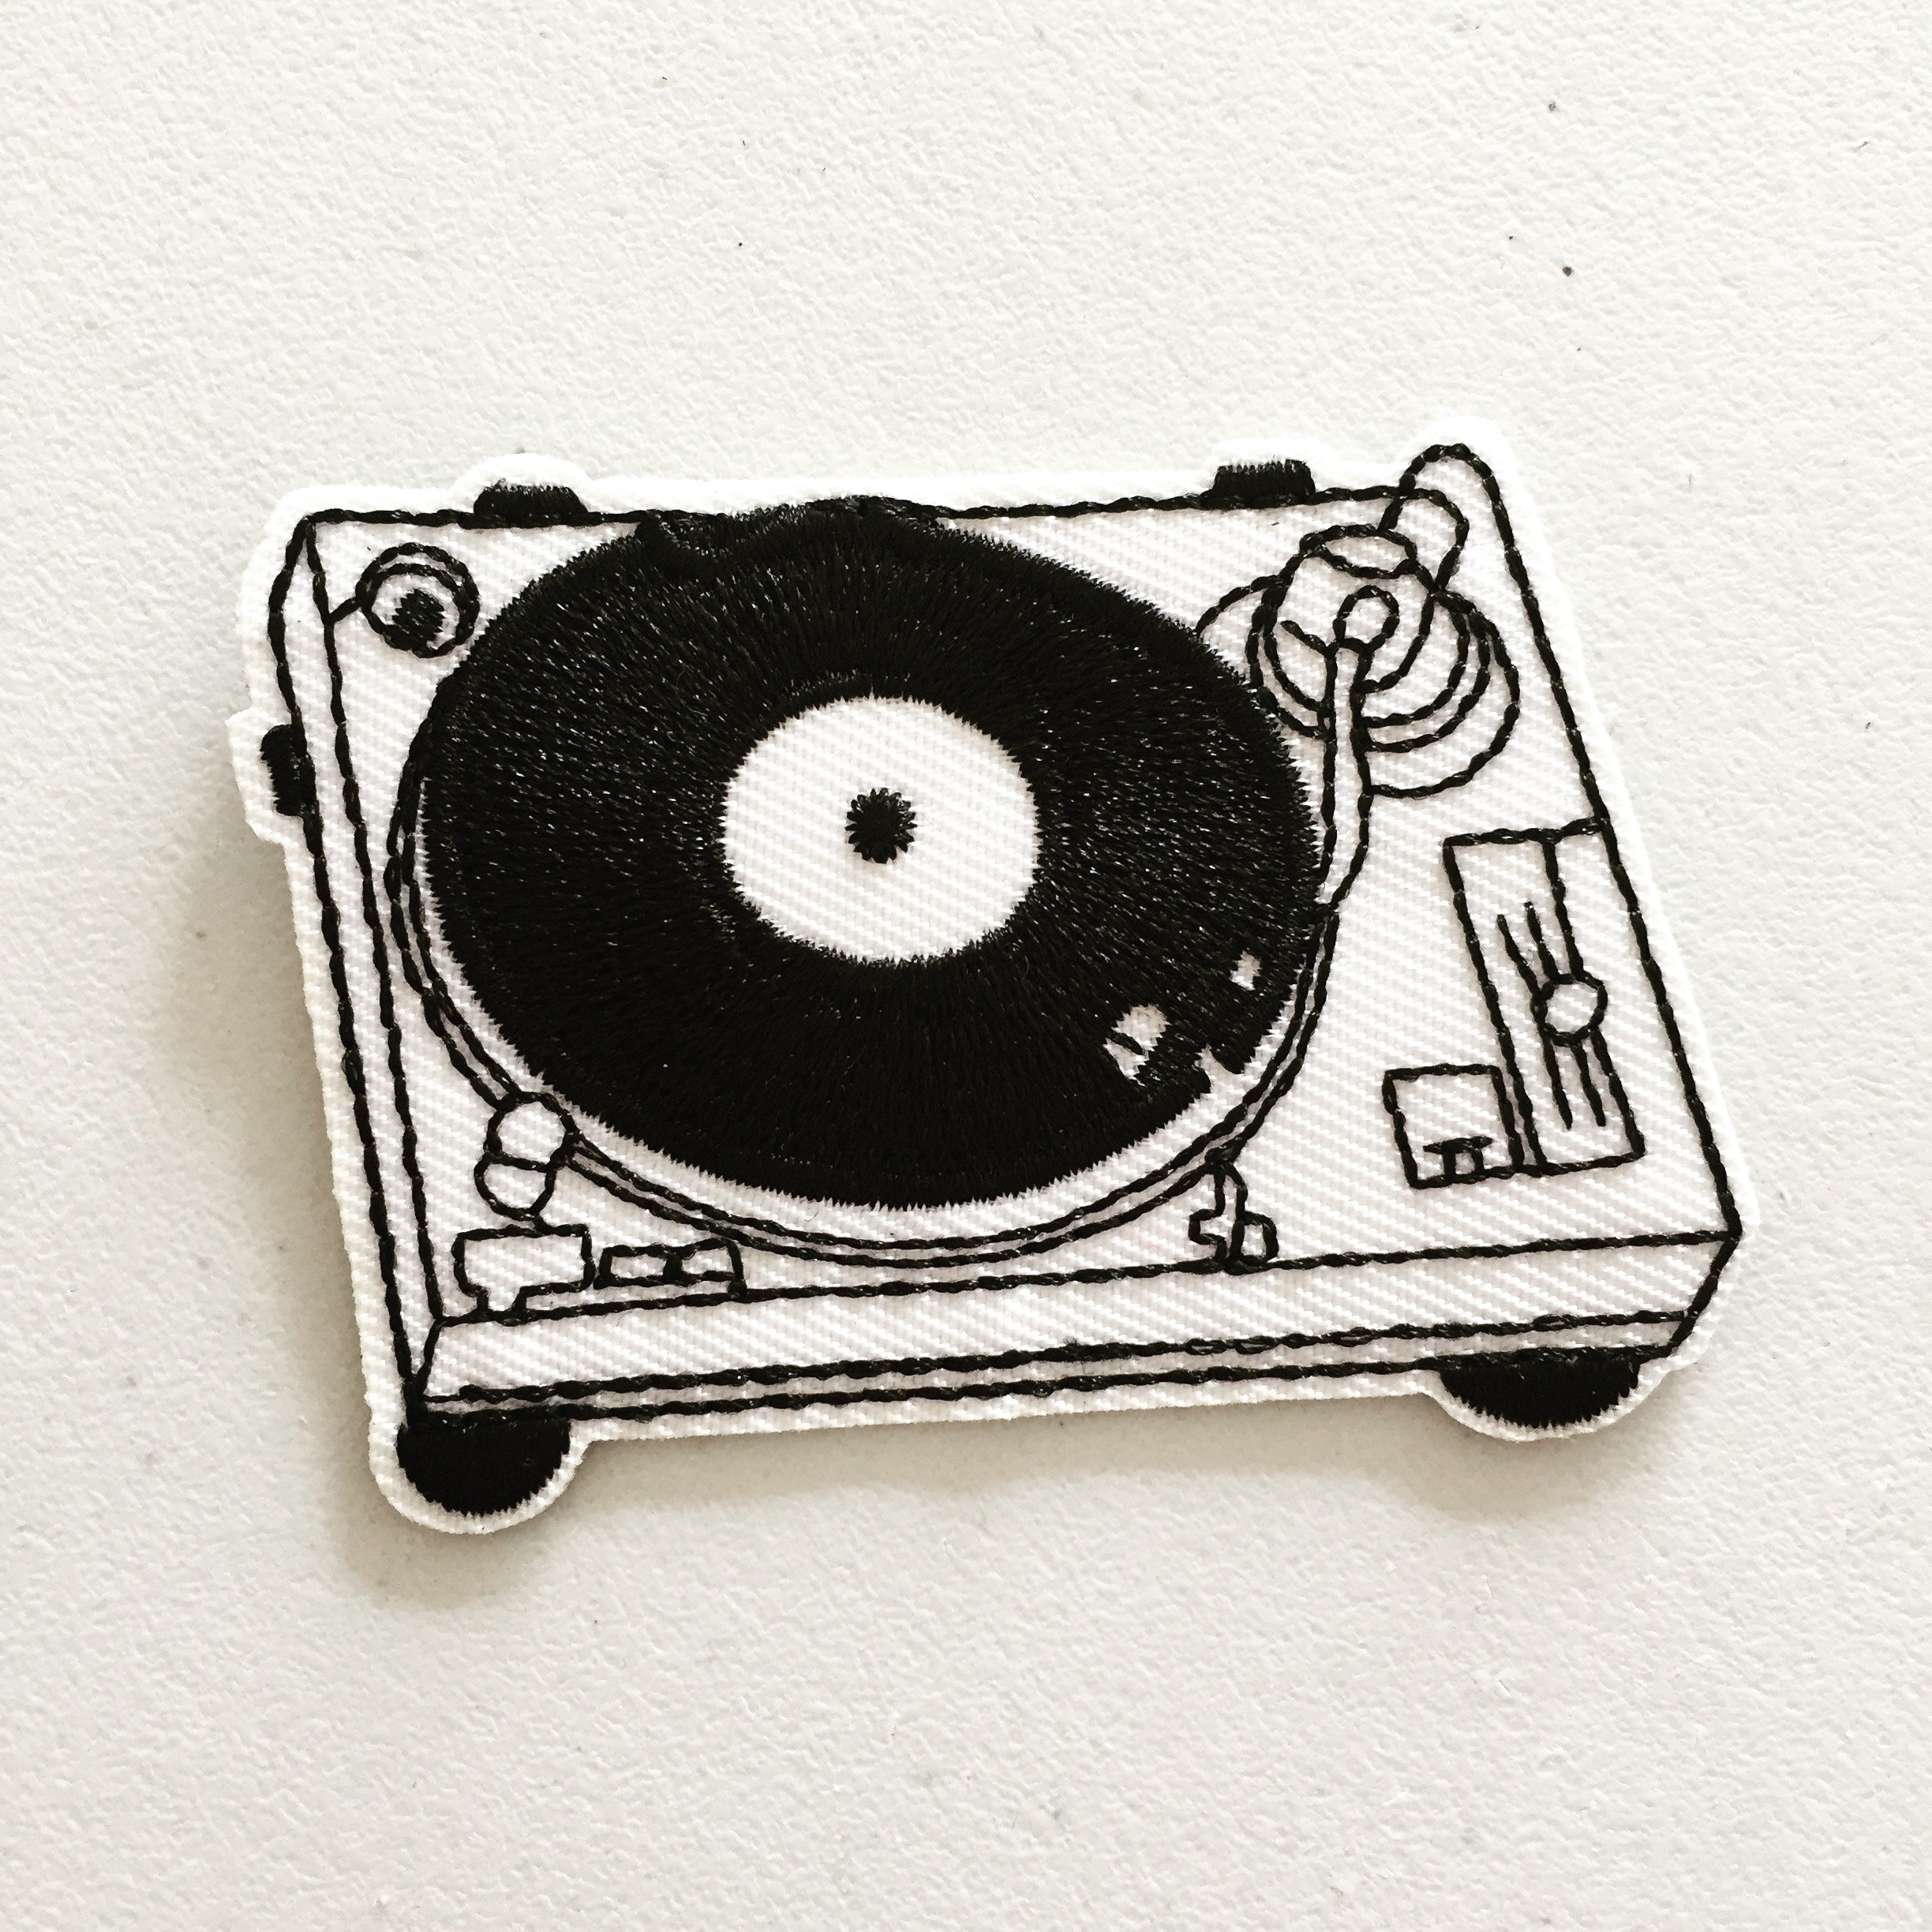 66. Record Player Iron-On Patch